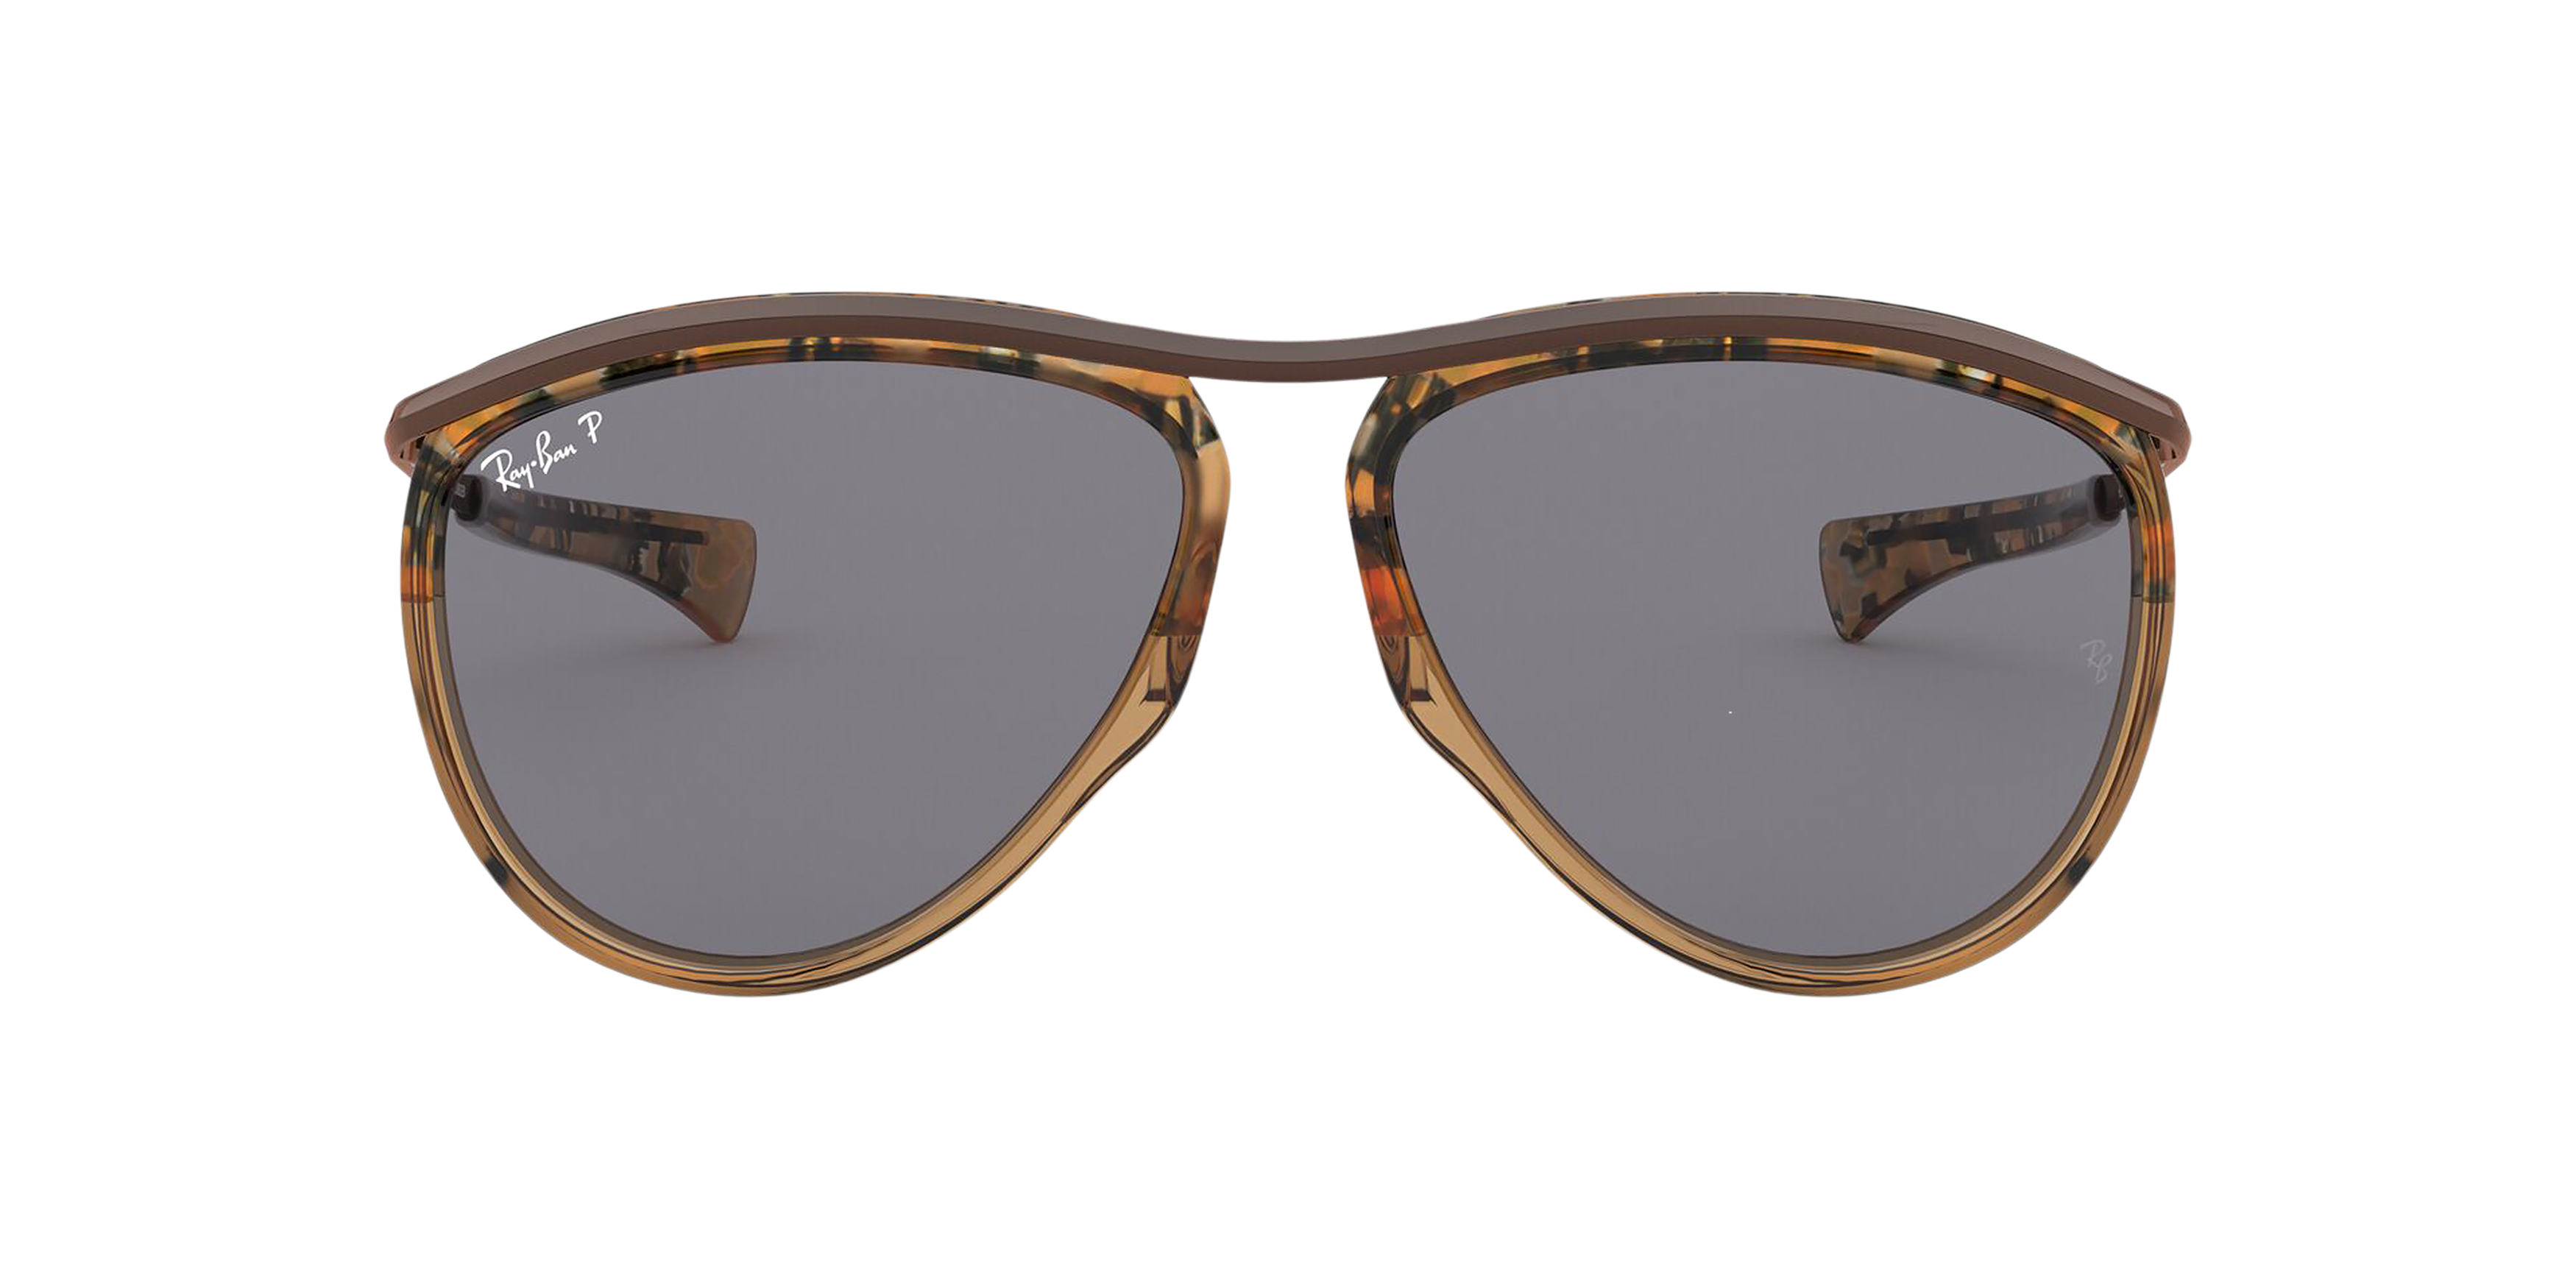 [products.image.front] Ray-Ban Olympian Aviator RB2219 128748